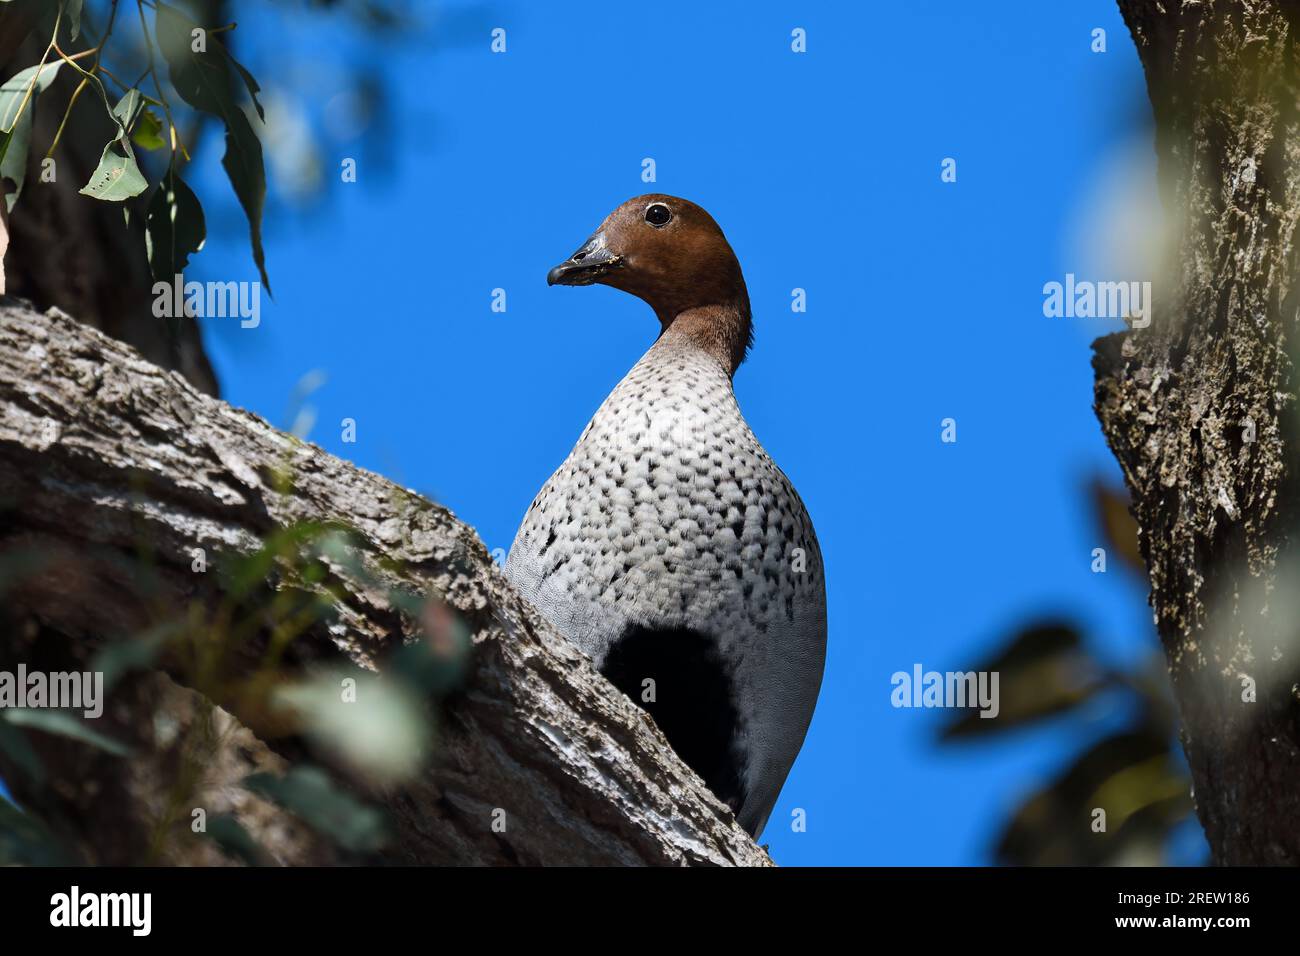 An adult male Australian Wood Duck -Chenonetta jubata- bird perched high up on a tree branch looking to camera in morning sunlight with copy space Stock Photo